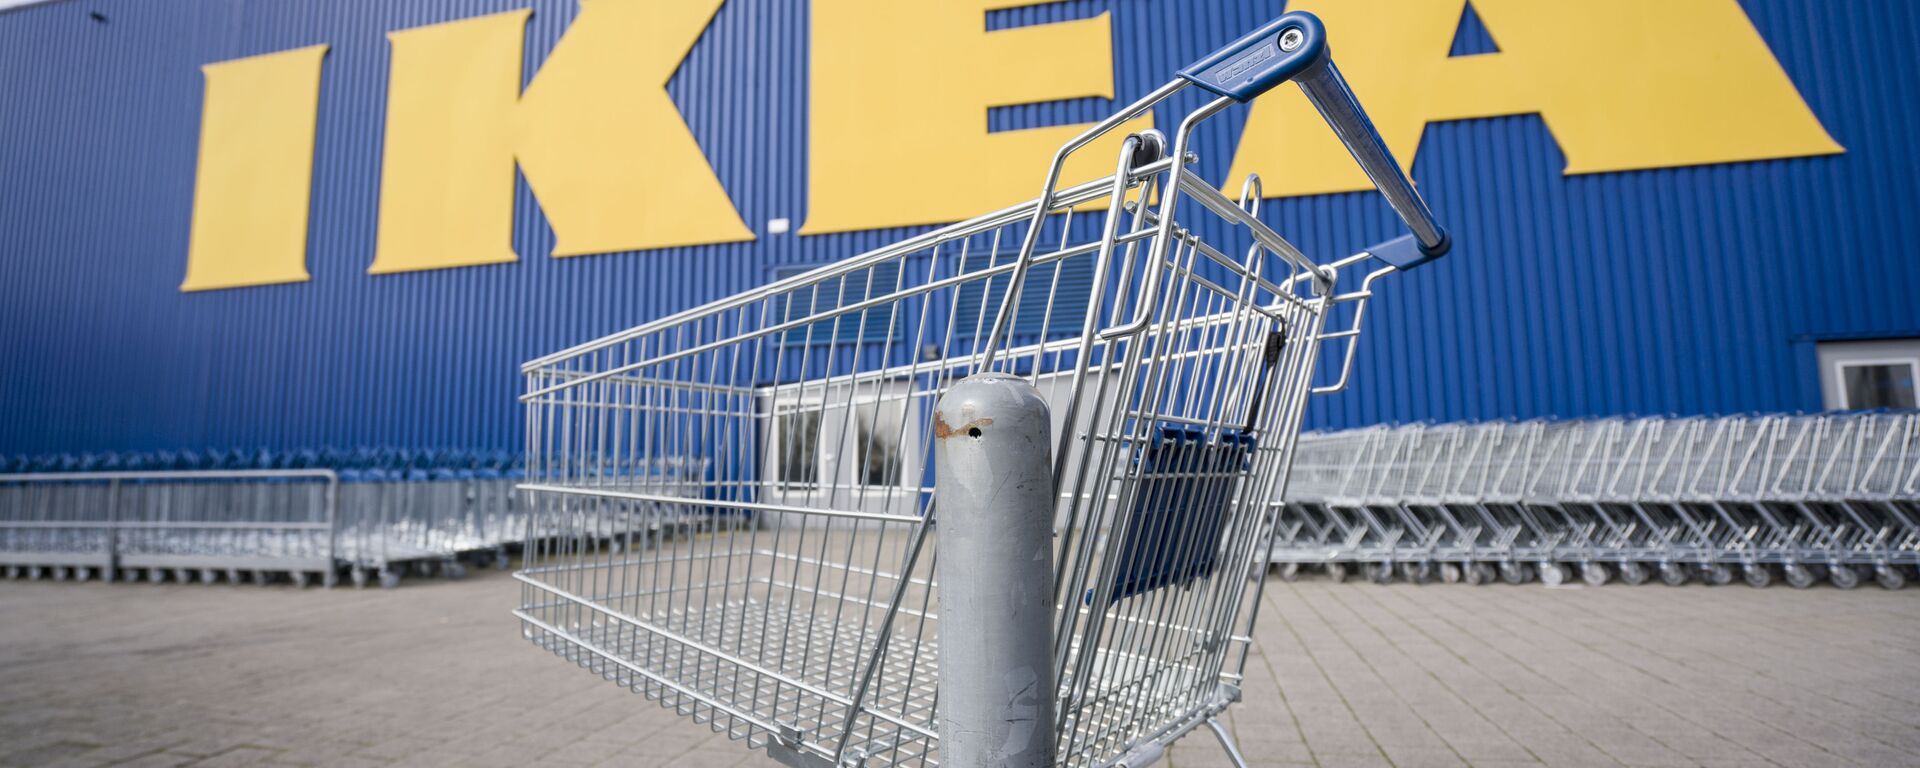 Until further notice, the branch of the furniture chain Ikea at the location of the company's German headquarters in Wallau near Wiesbaden is closed, in front of which an empty shopping trolley is standing, Germany, Tuesday, March 17, 2020. - Sputnik International, 1920, 08.04.2023